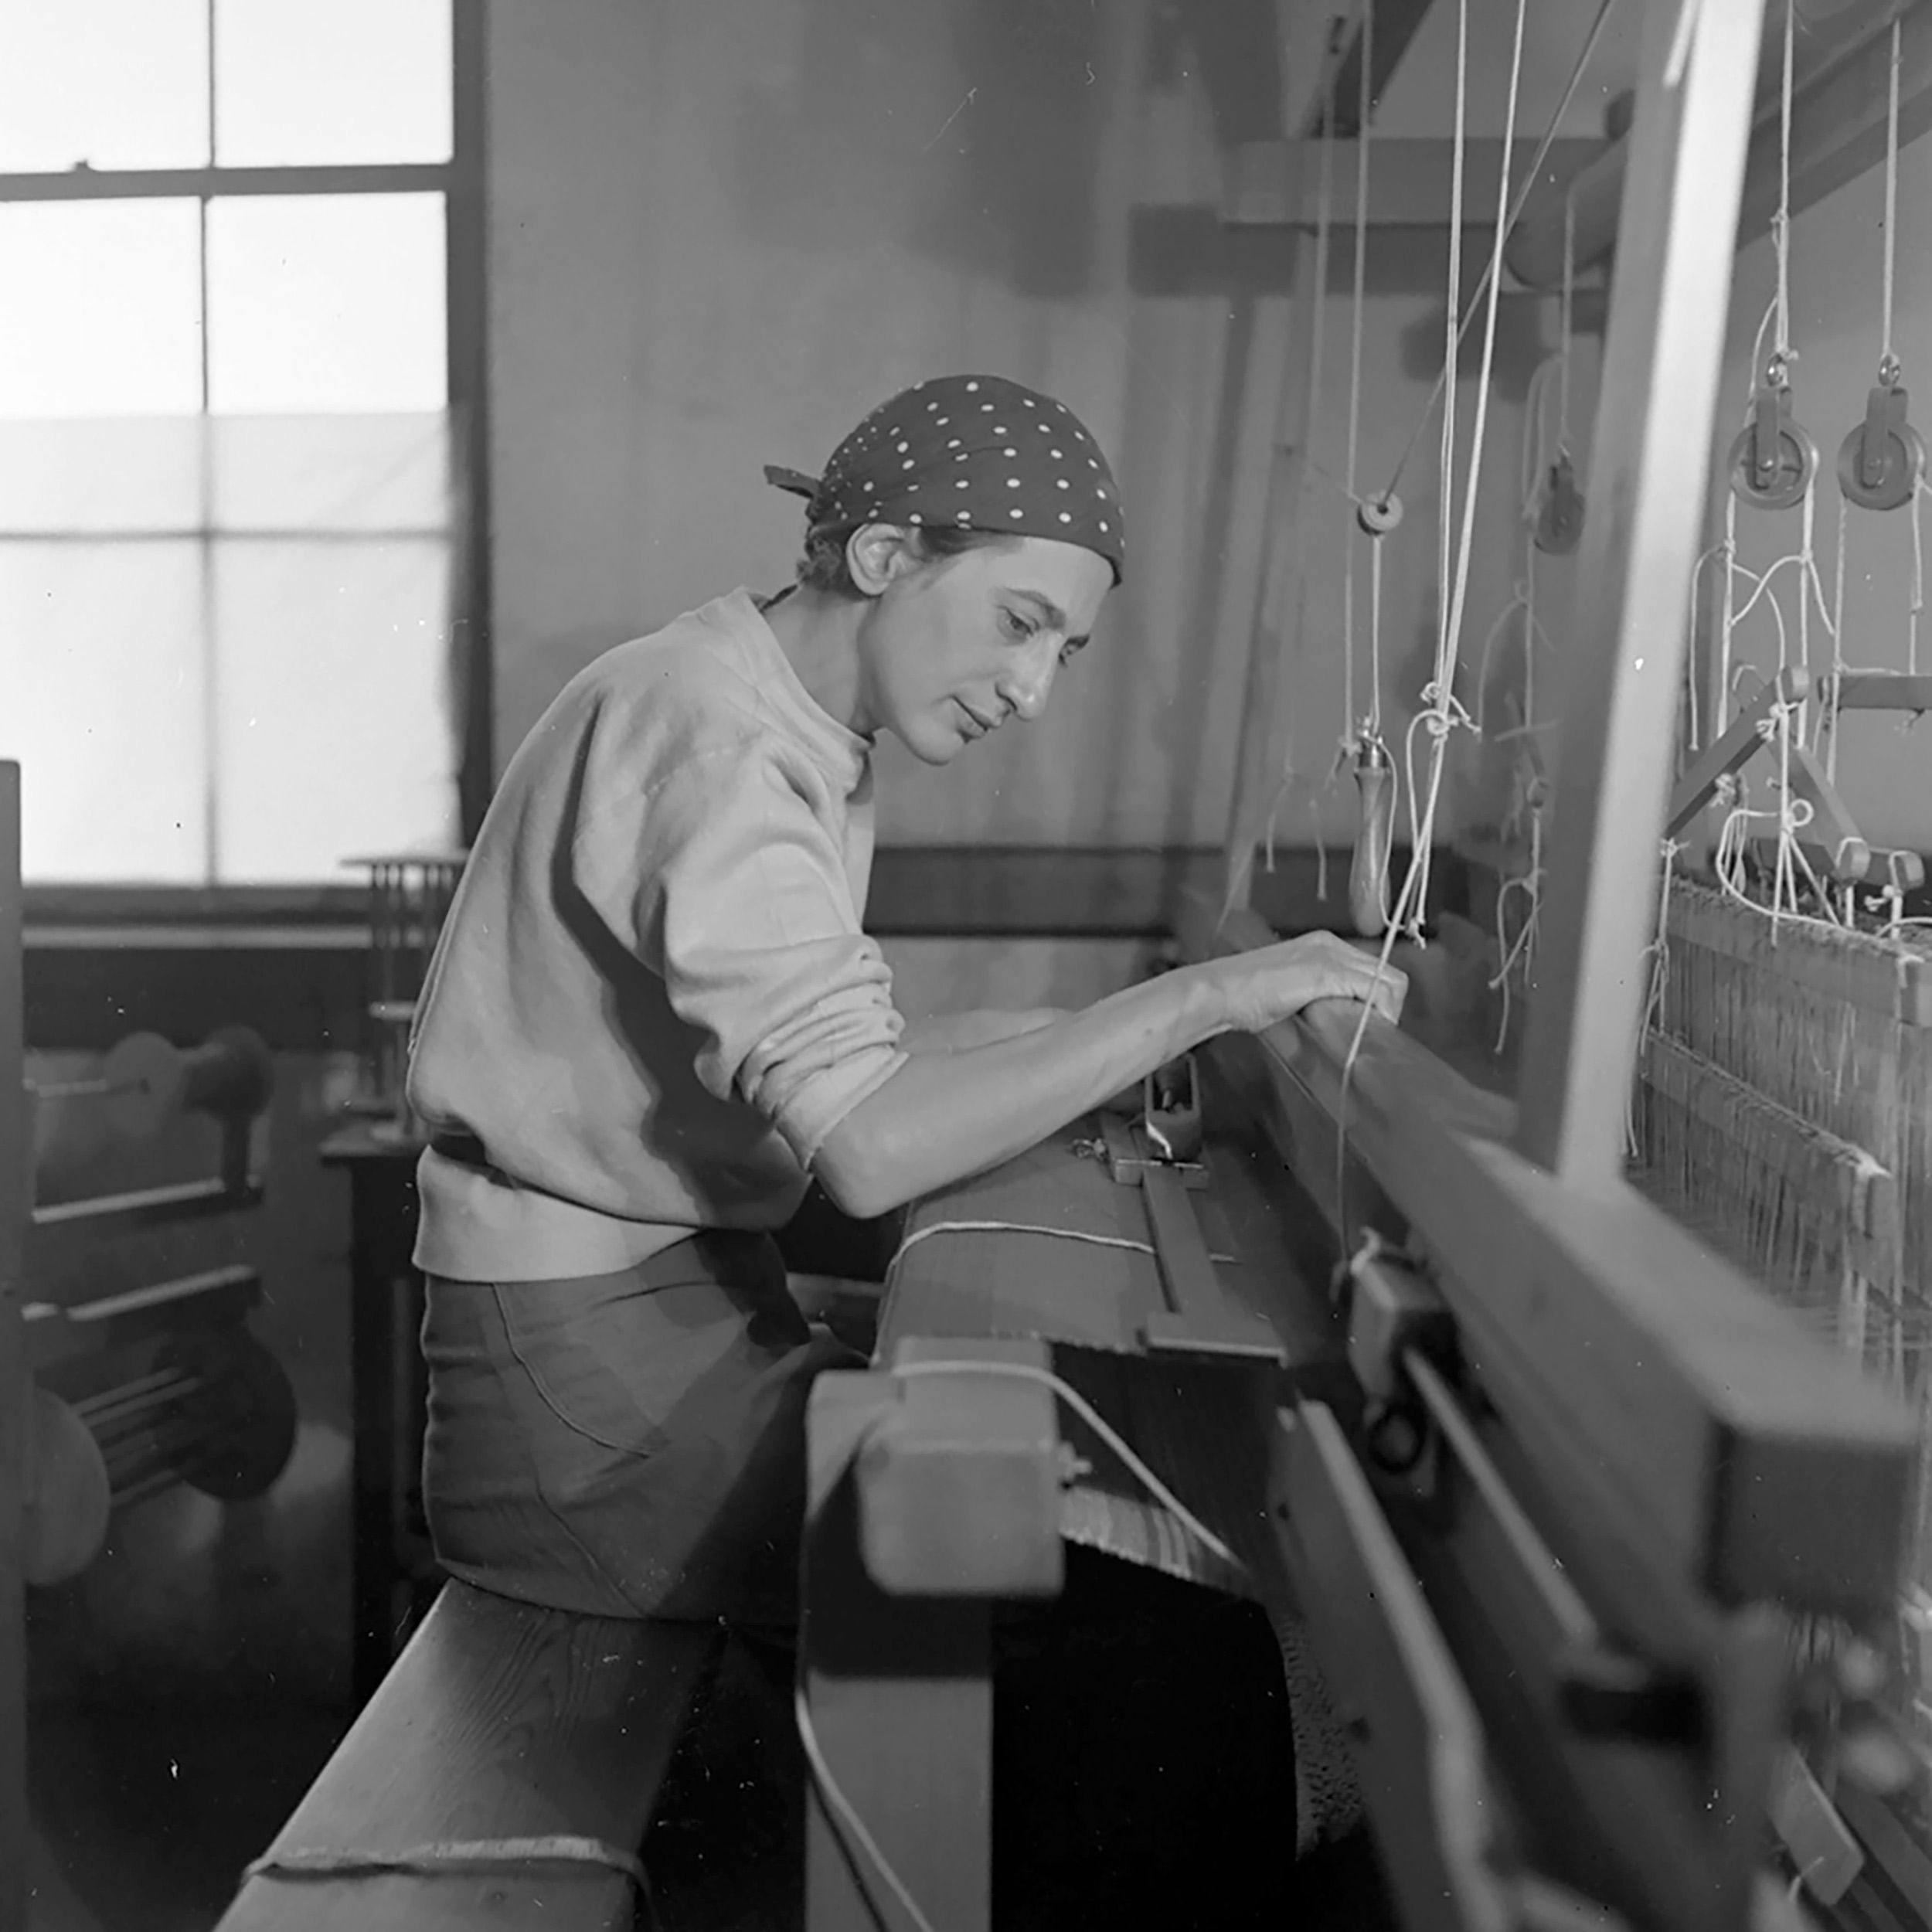 Anni Albers in her weaving studio at Black Mountain College, dated 1937.